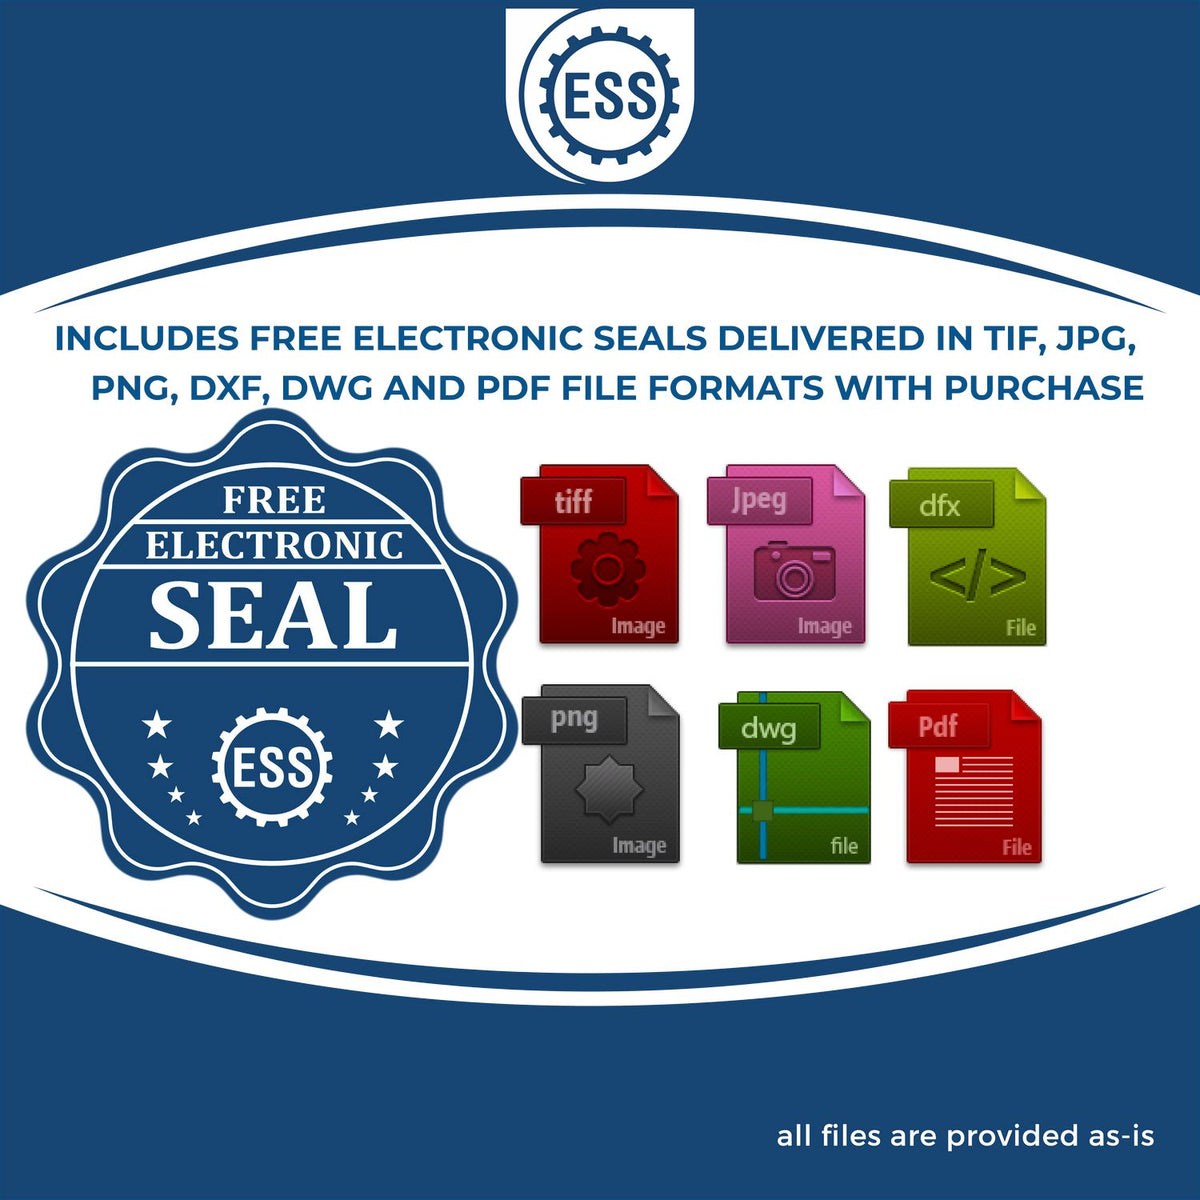 An infographic for the free electronic seal for the Gift Illinois Engineer Seal illustrating the different file type icons such as DXF, DWG, TIF, JPG and PNG.